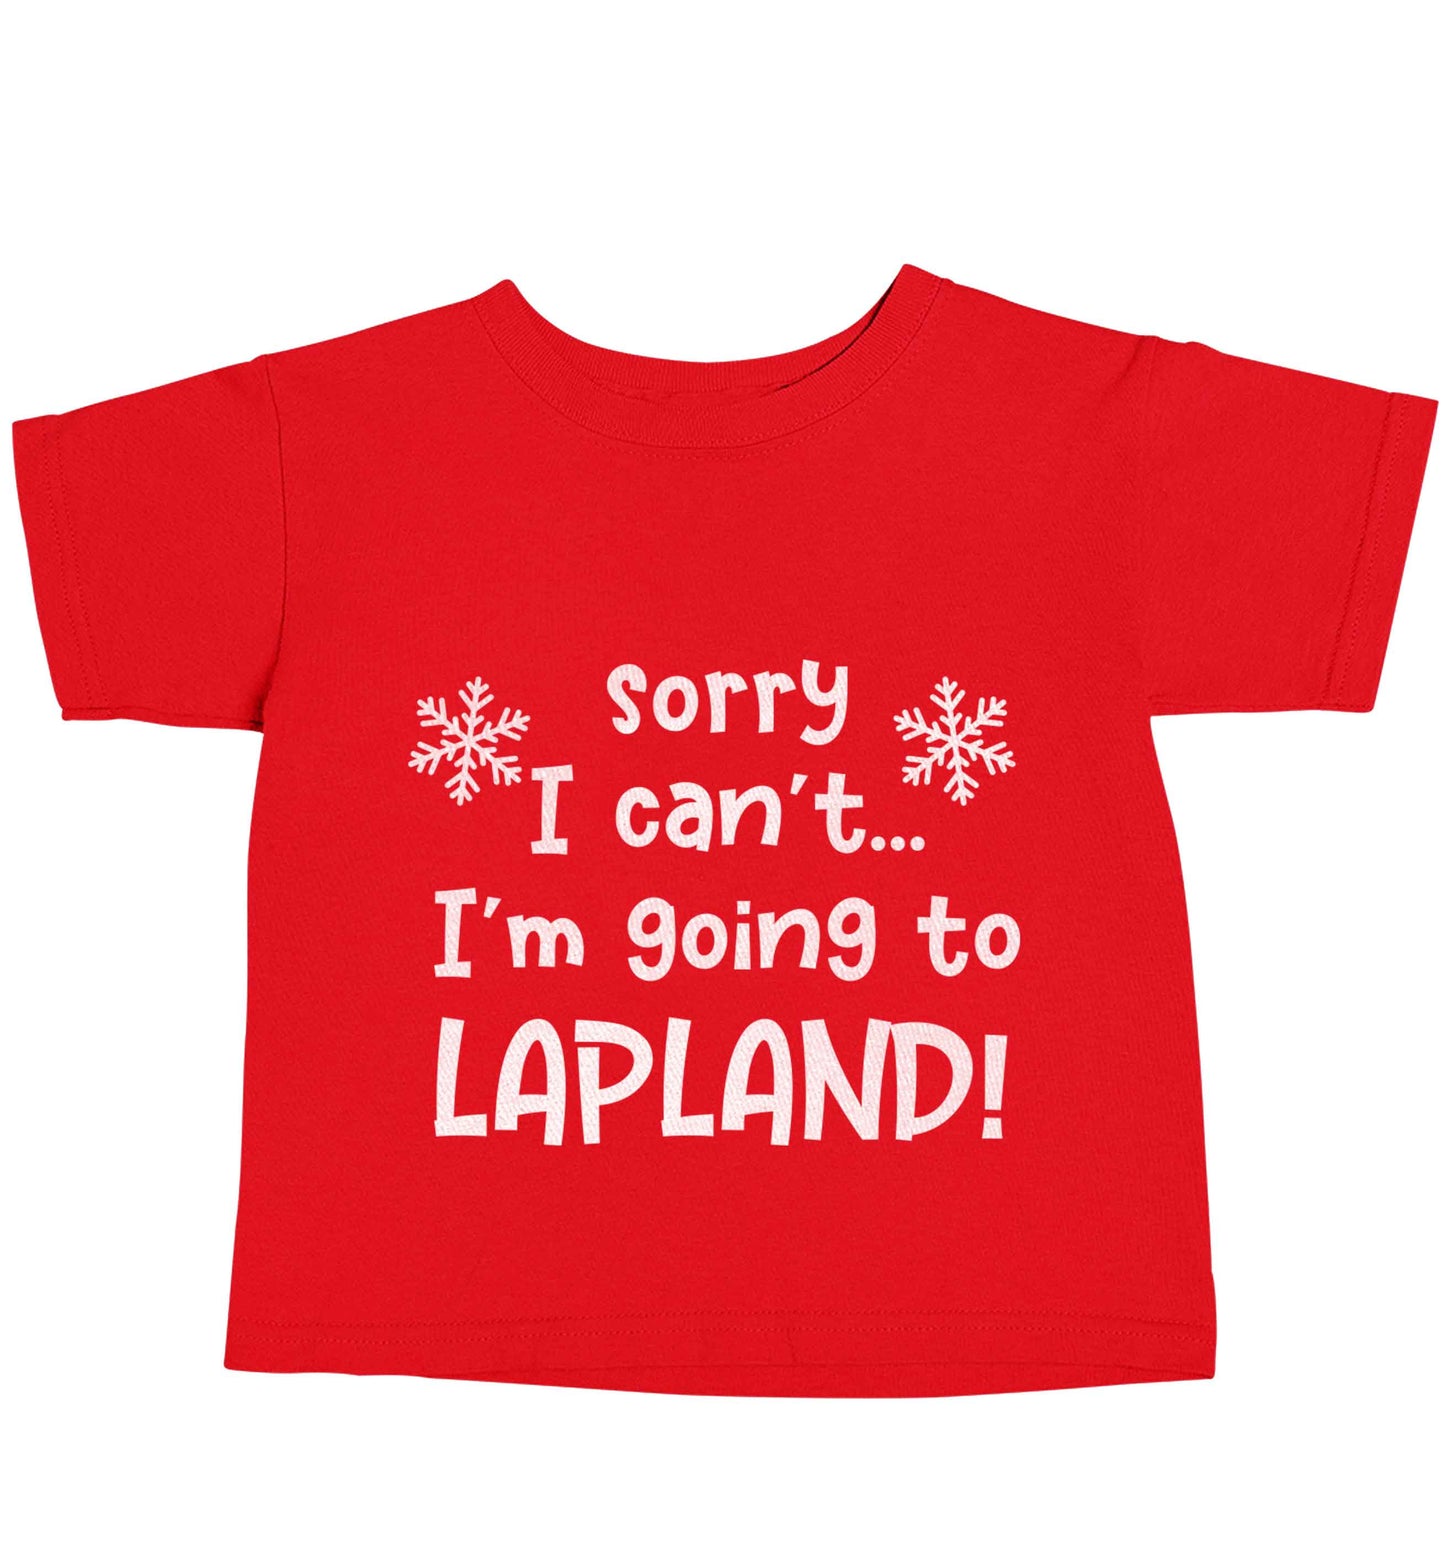 Sorry I can't I'm going to Lapland red baby toddler Tshirt 2 Years